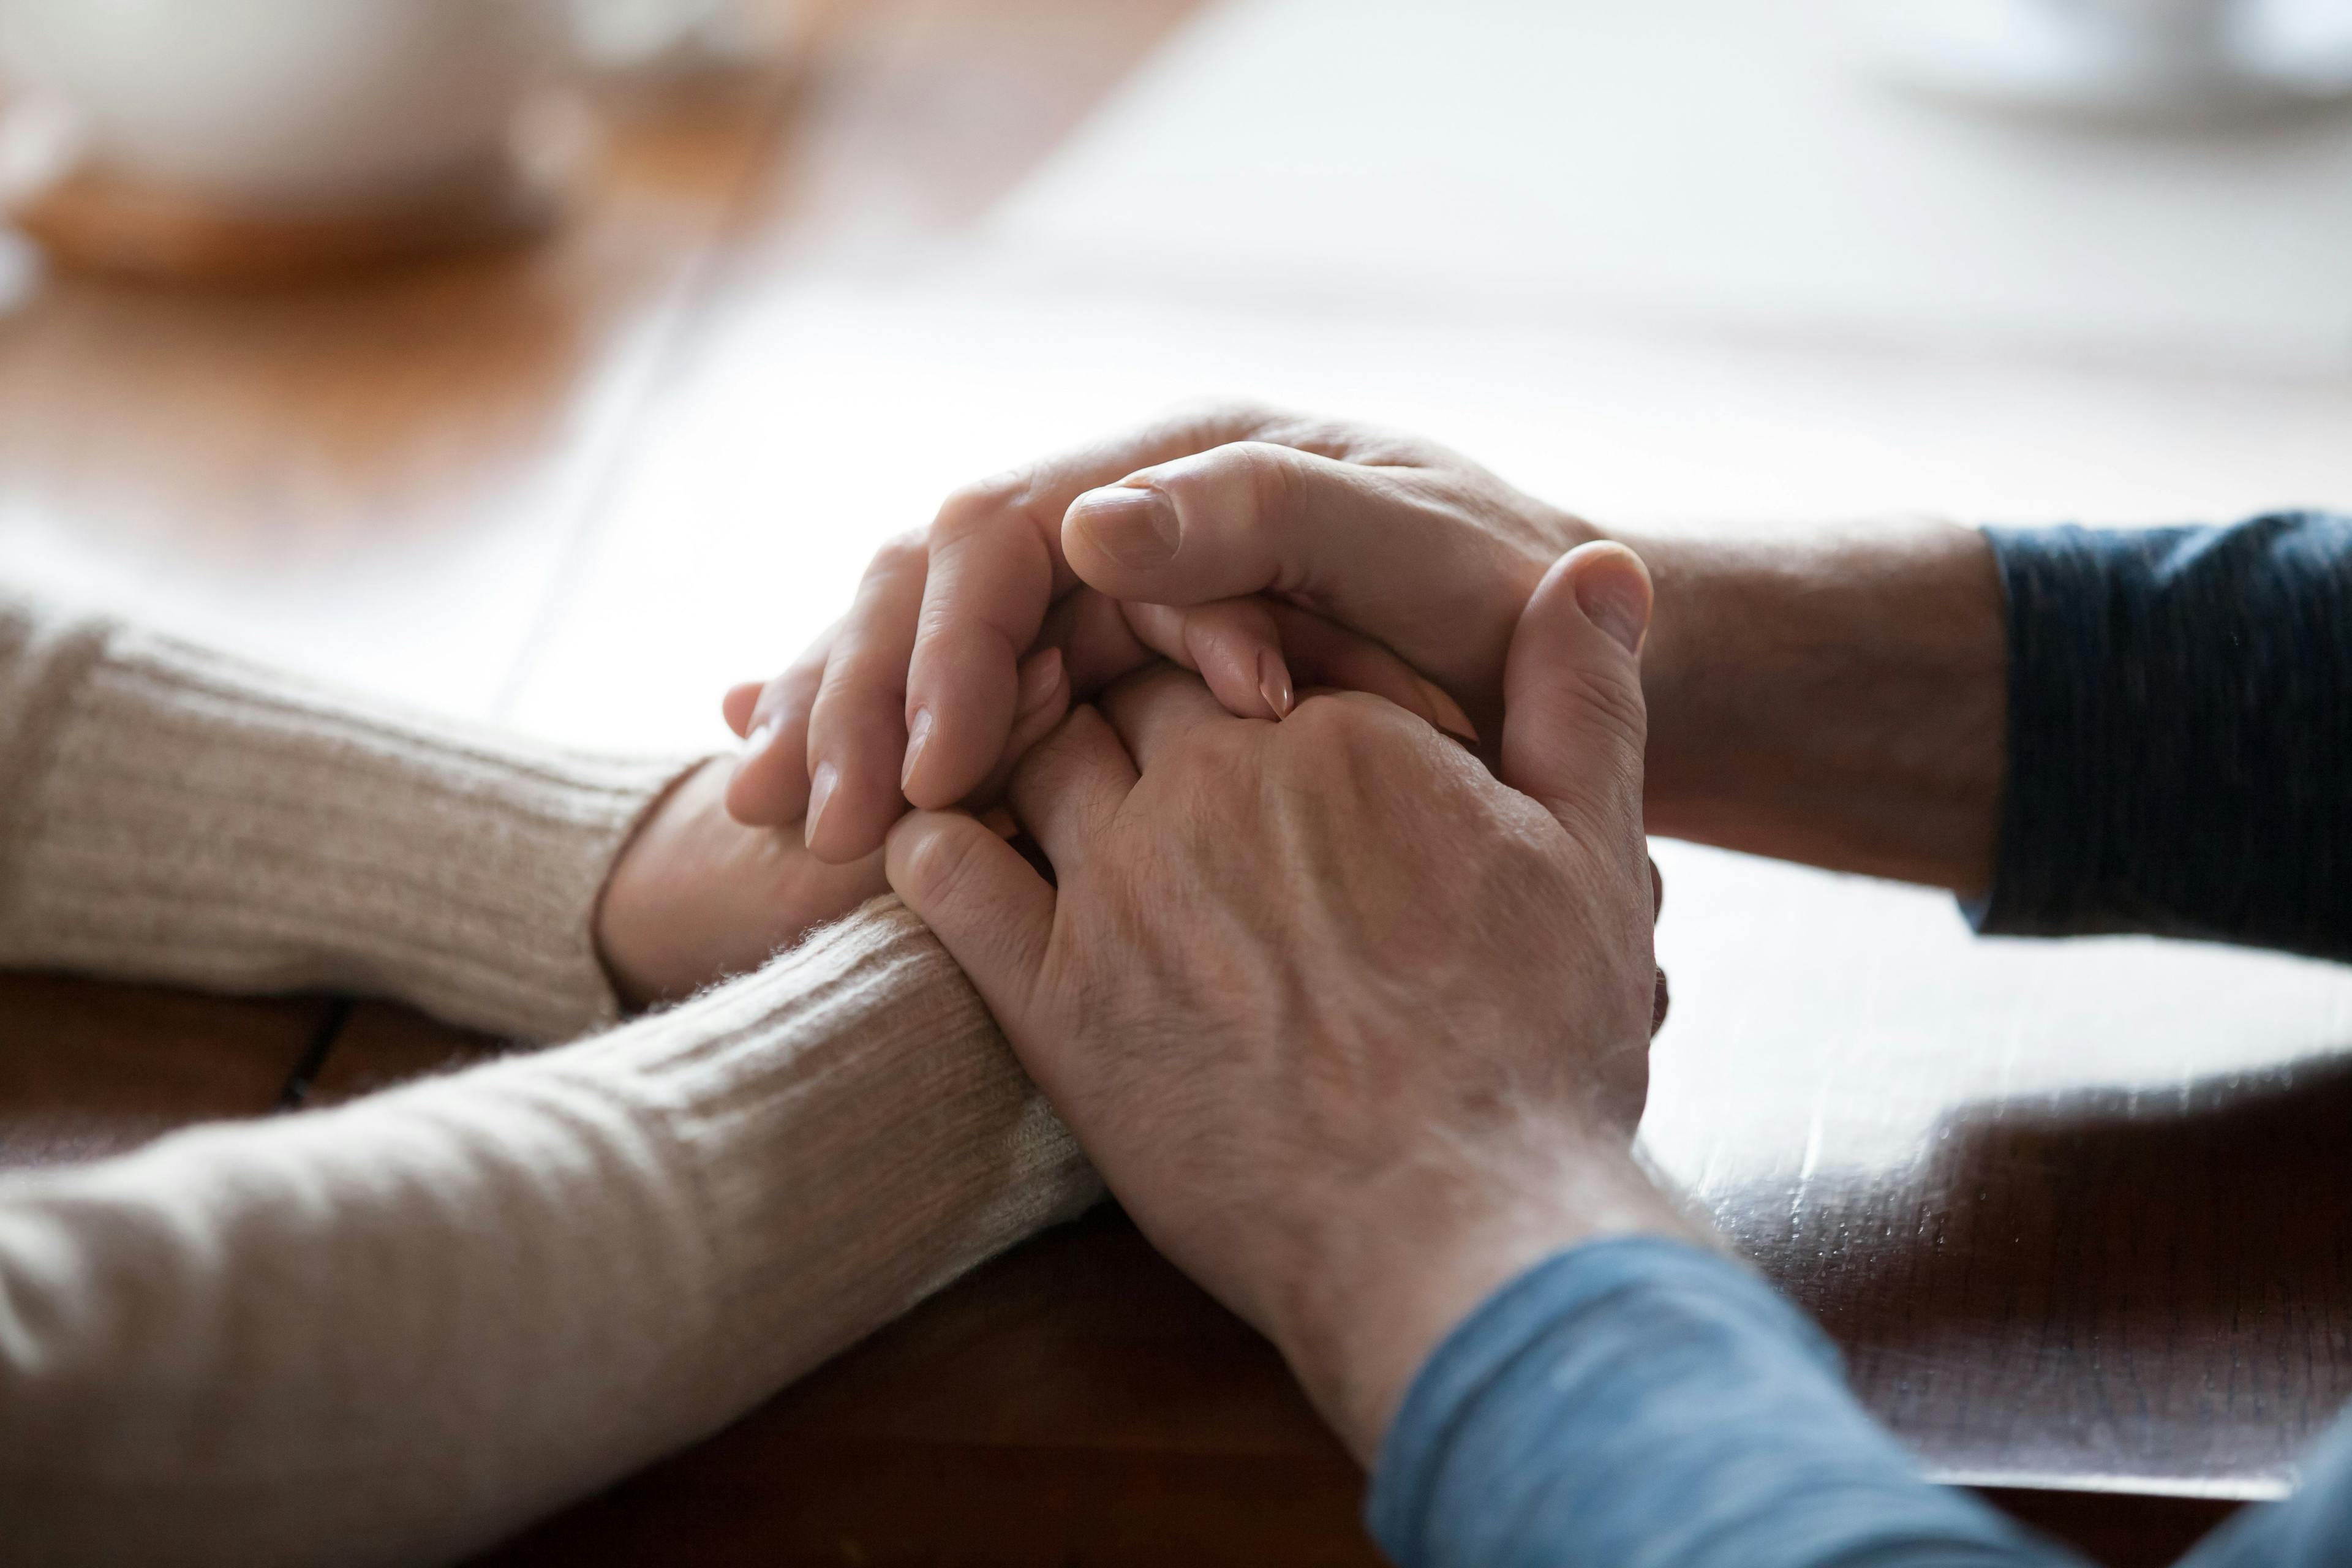 Caring for a Spouse With Dementia Increases Risk of Depressive Symptoms